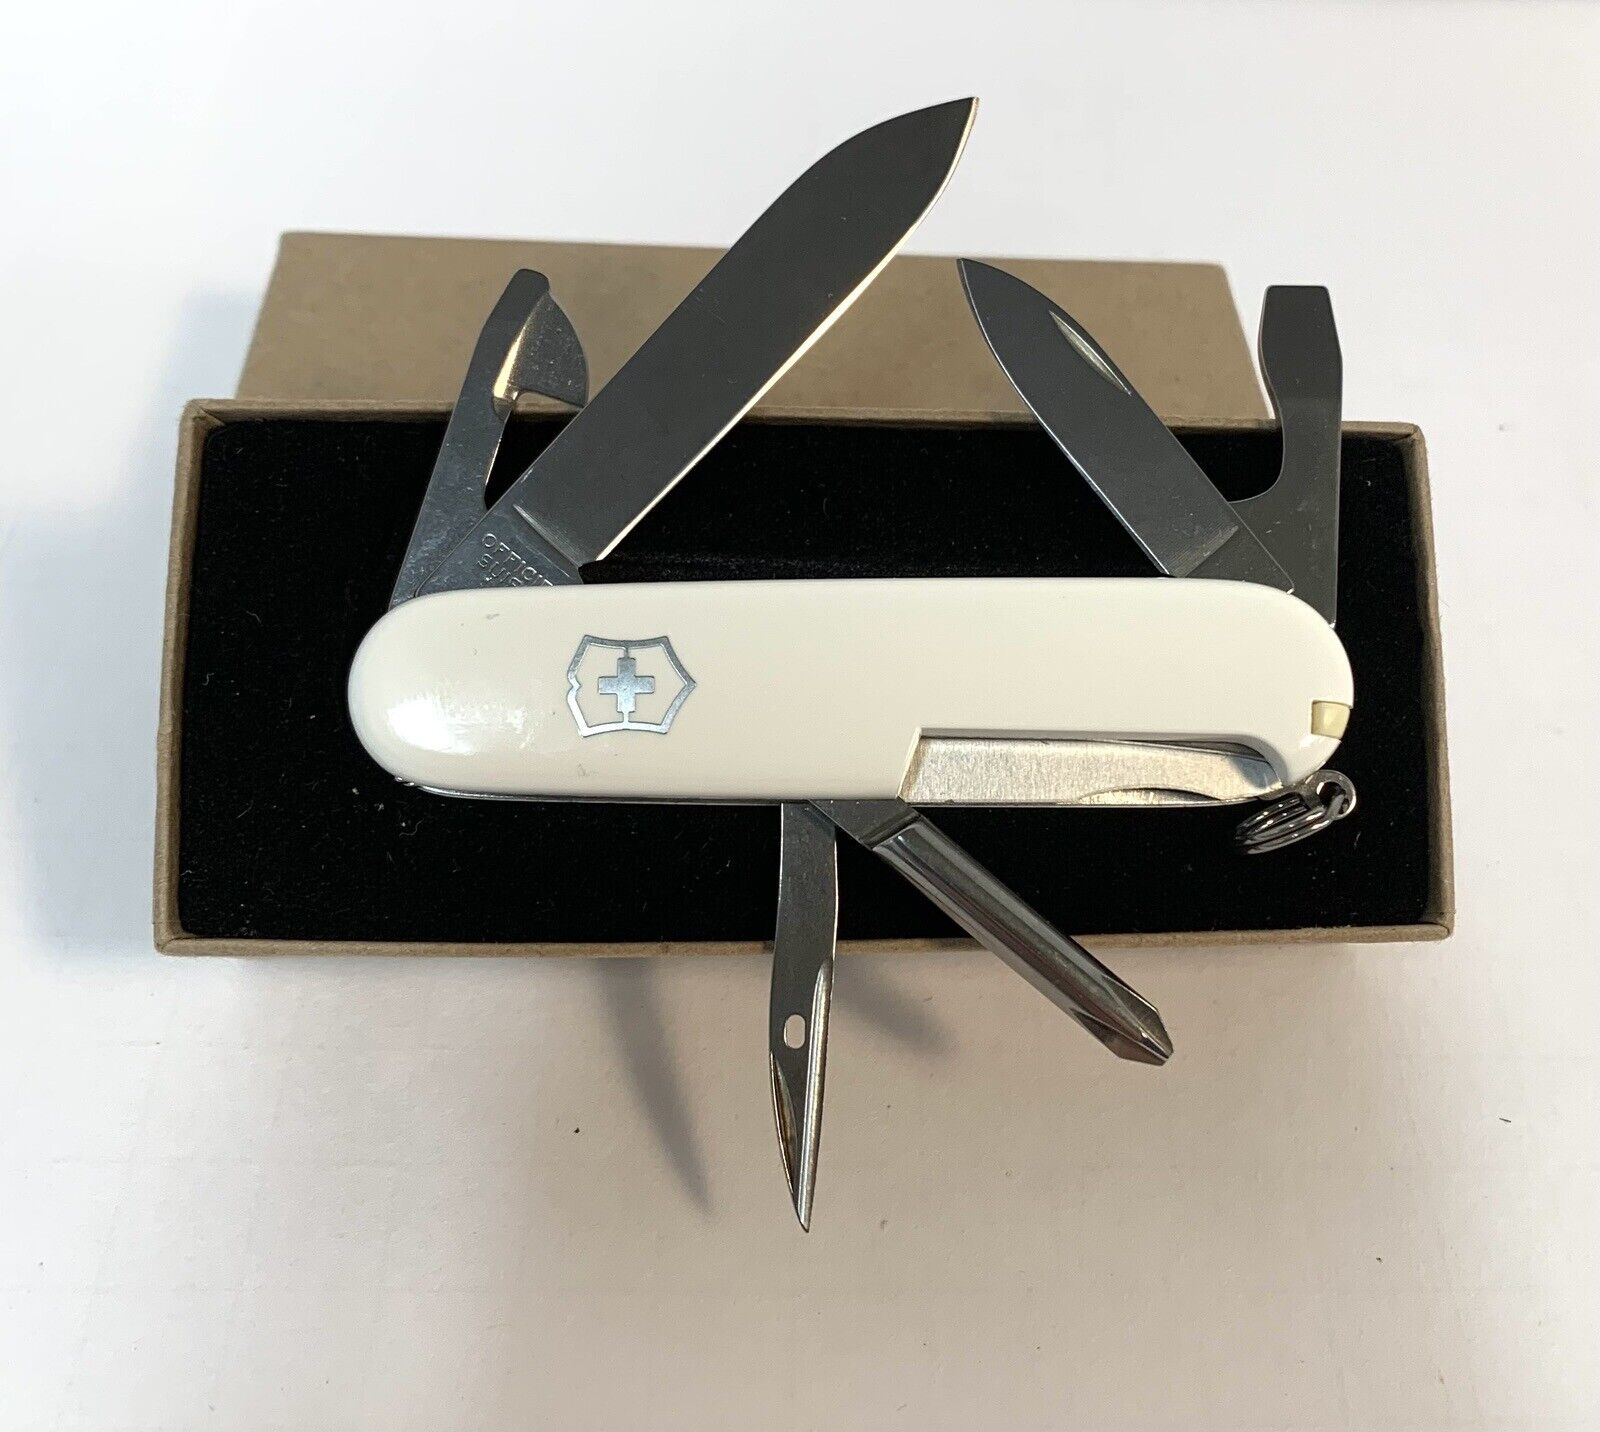 Victronix Swiss Army Knife With 12 Functions NIB White Handles